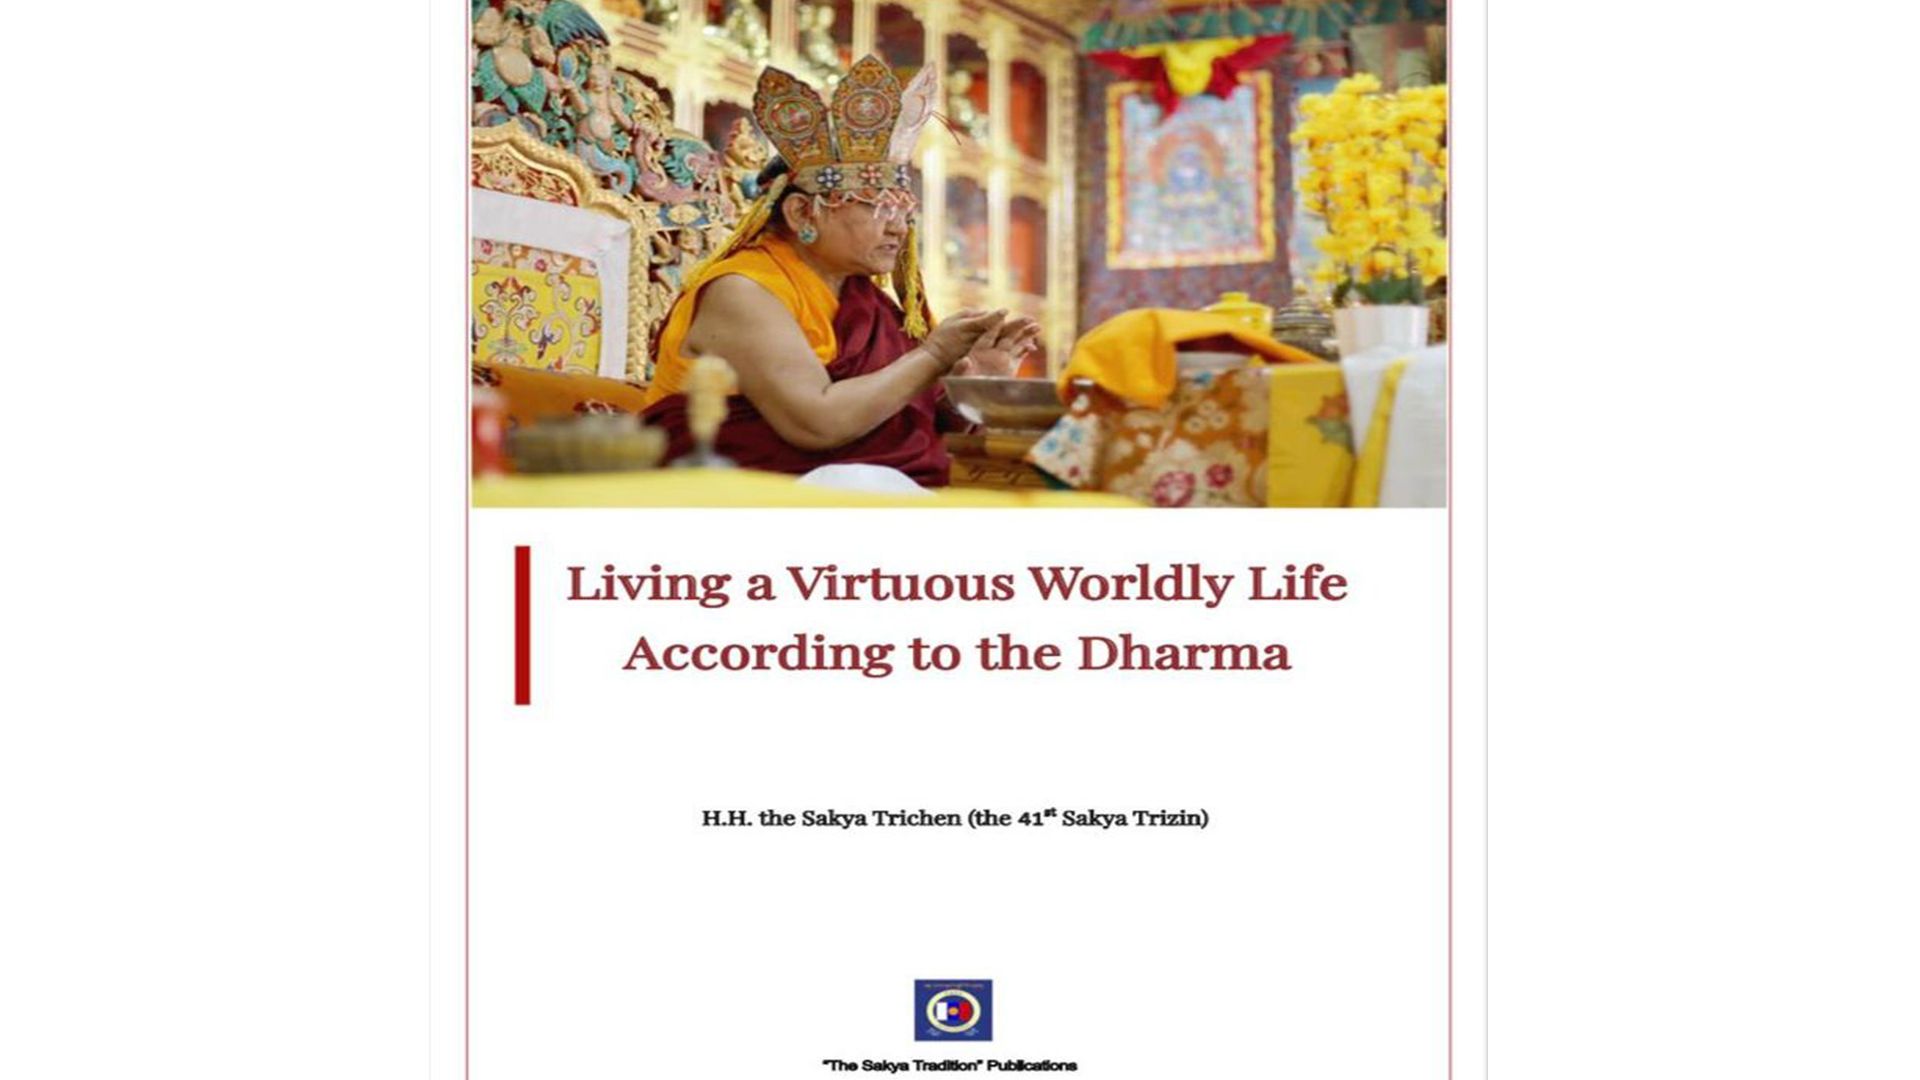 Living a Virtuous Worldly Life According to the Dharma